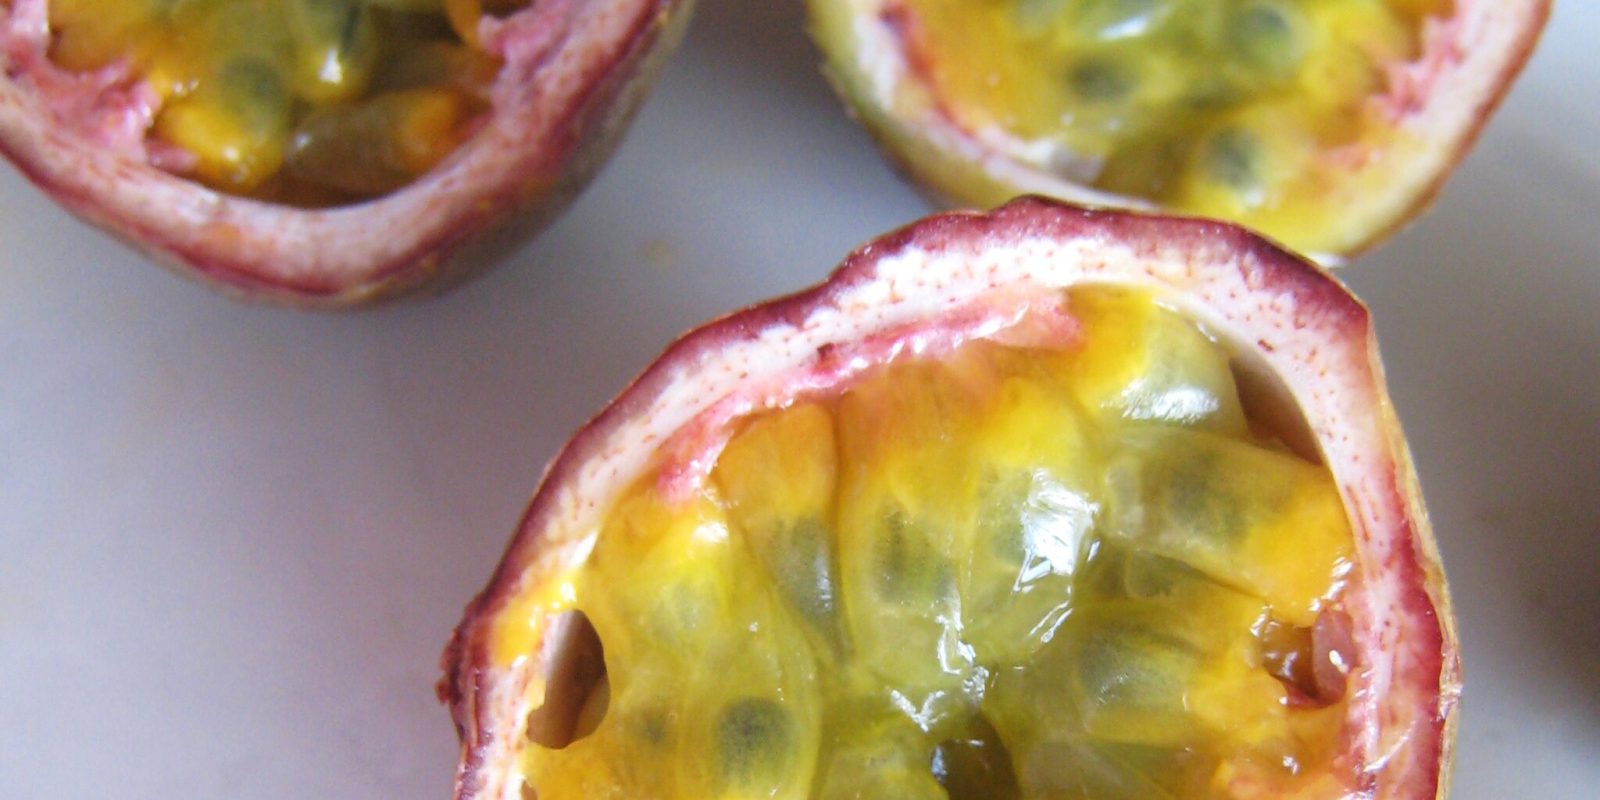 With their vigorous growth and ability to tolerate sandy soil, passionfruits grow great on Aotea. Photo / Paul Munhoven / CC